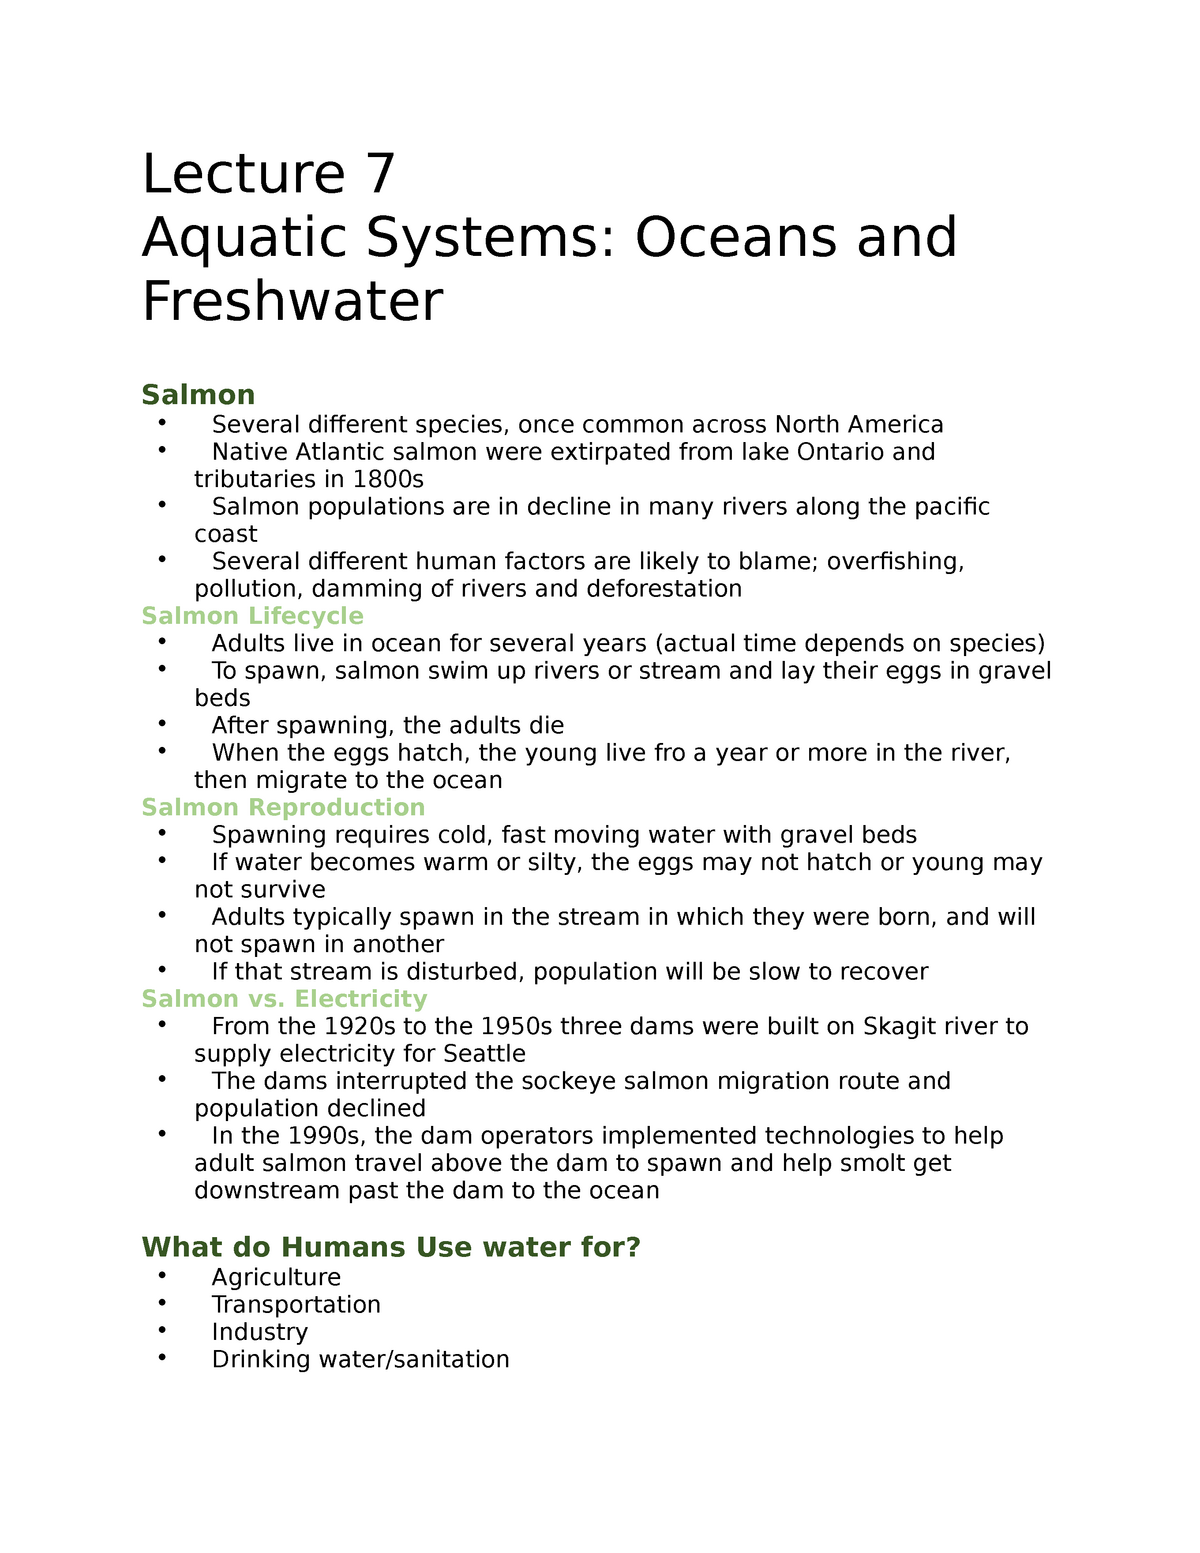 ES lecture 7 - Aquatic systems: Oceans and Freshwater - Lecture 7 Aquatic  Systems: Oceans and - Studocu